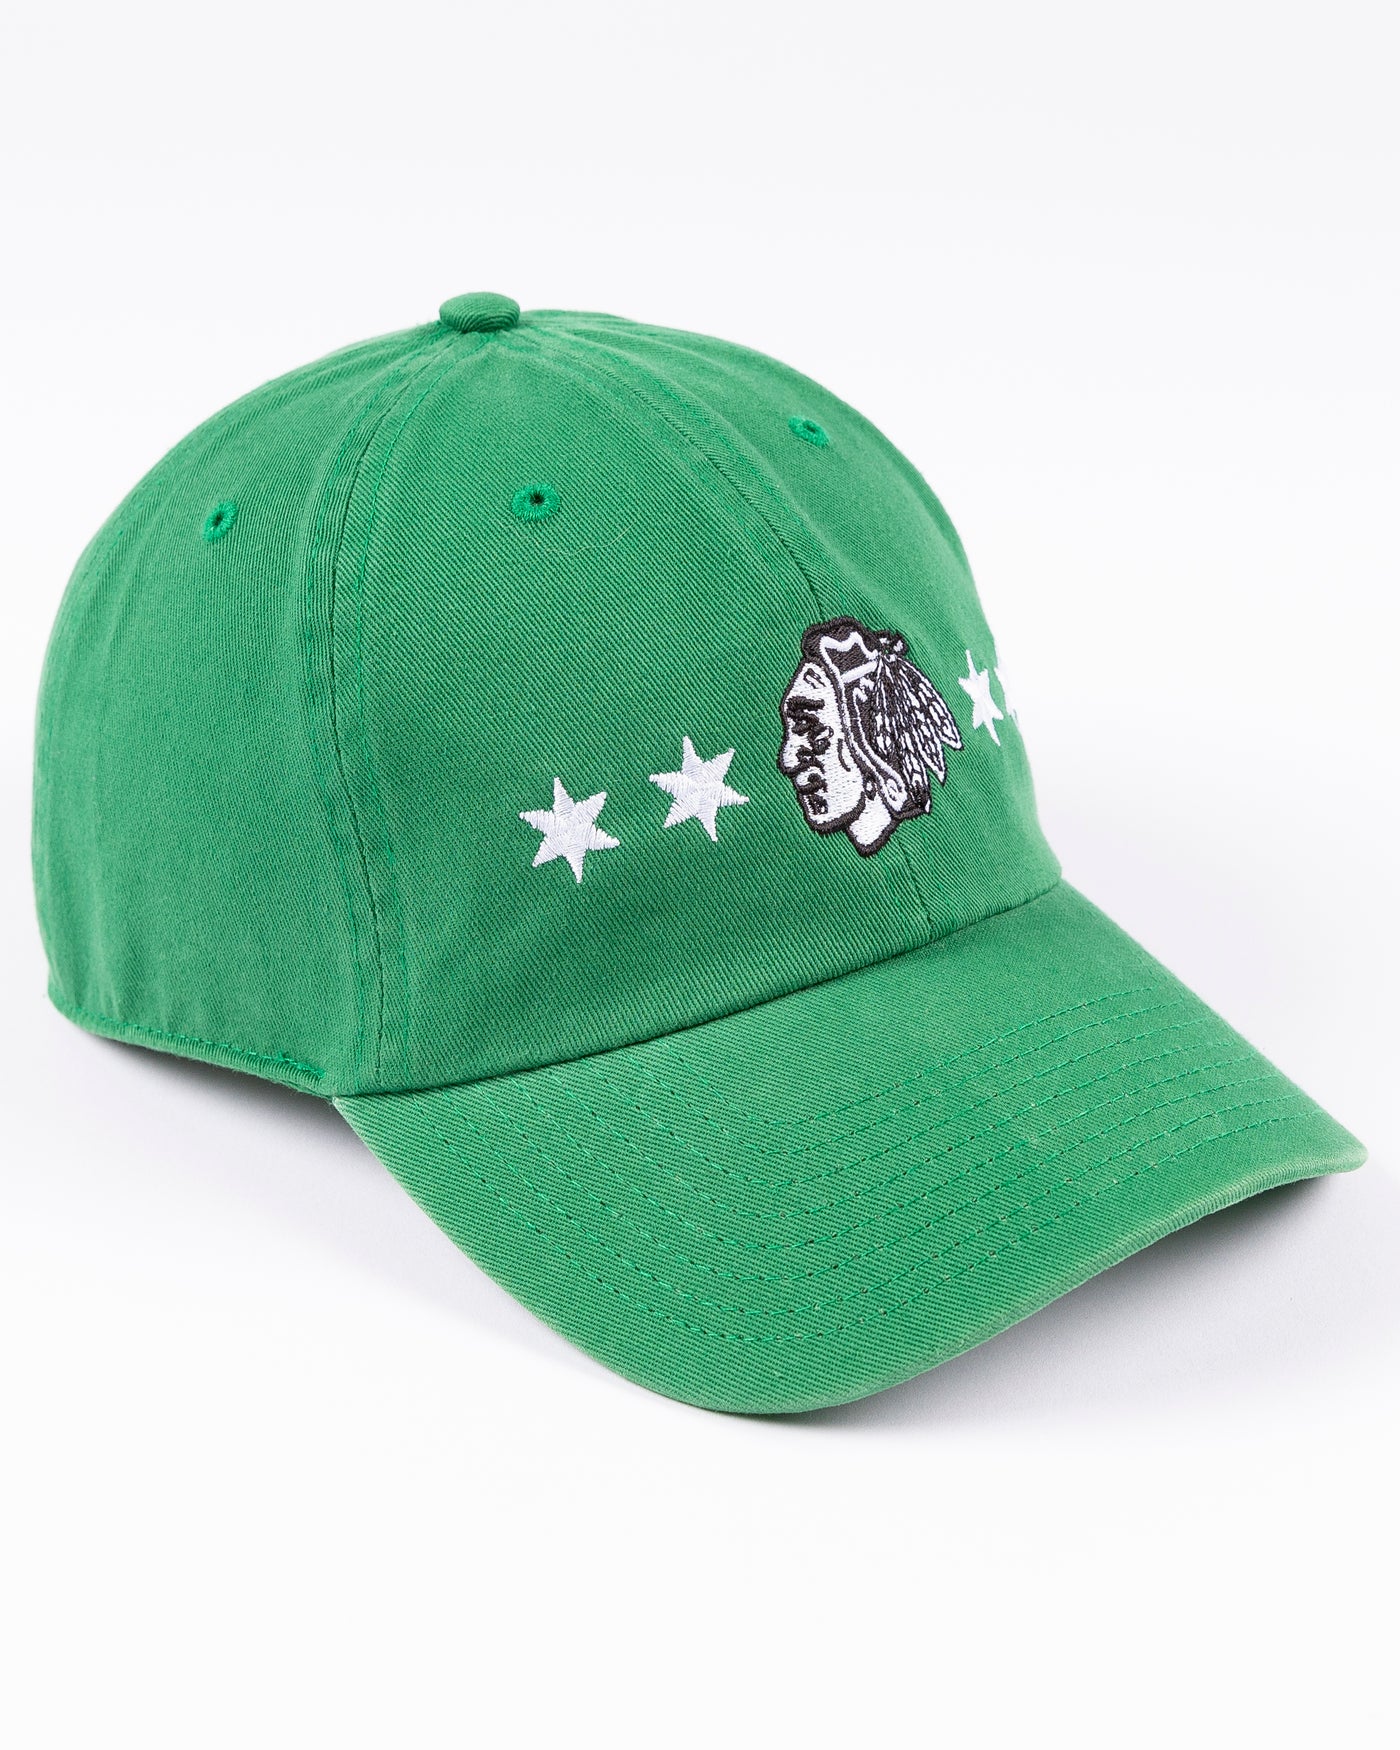 '47 brand green adjustable clean up cap with Chicago Blackhawks and four star design for St. Patrick's Day - right angled lay flat